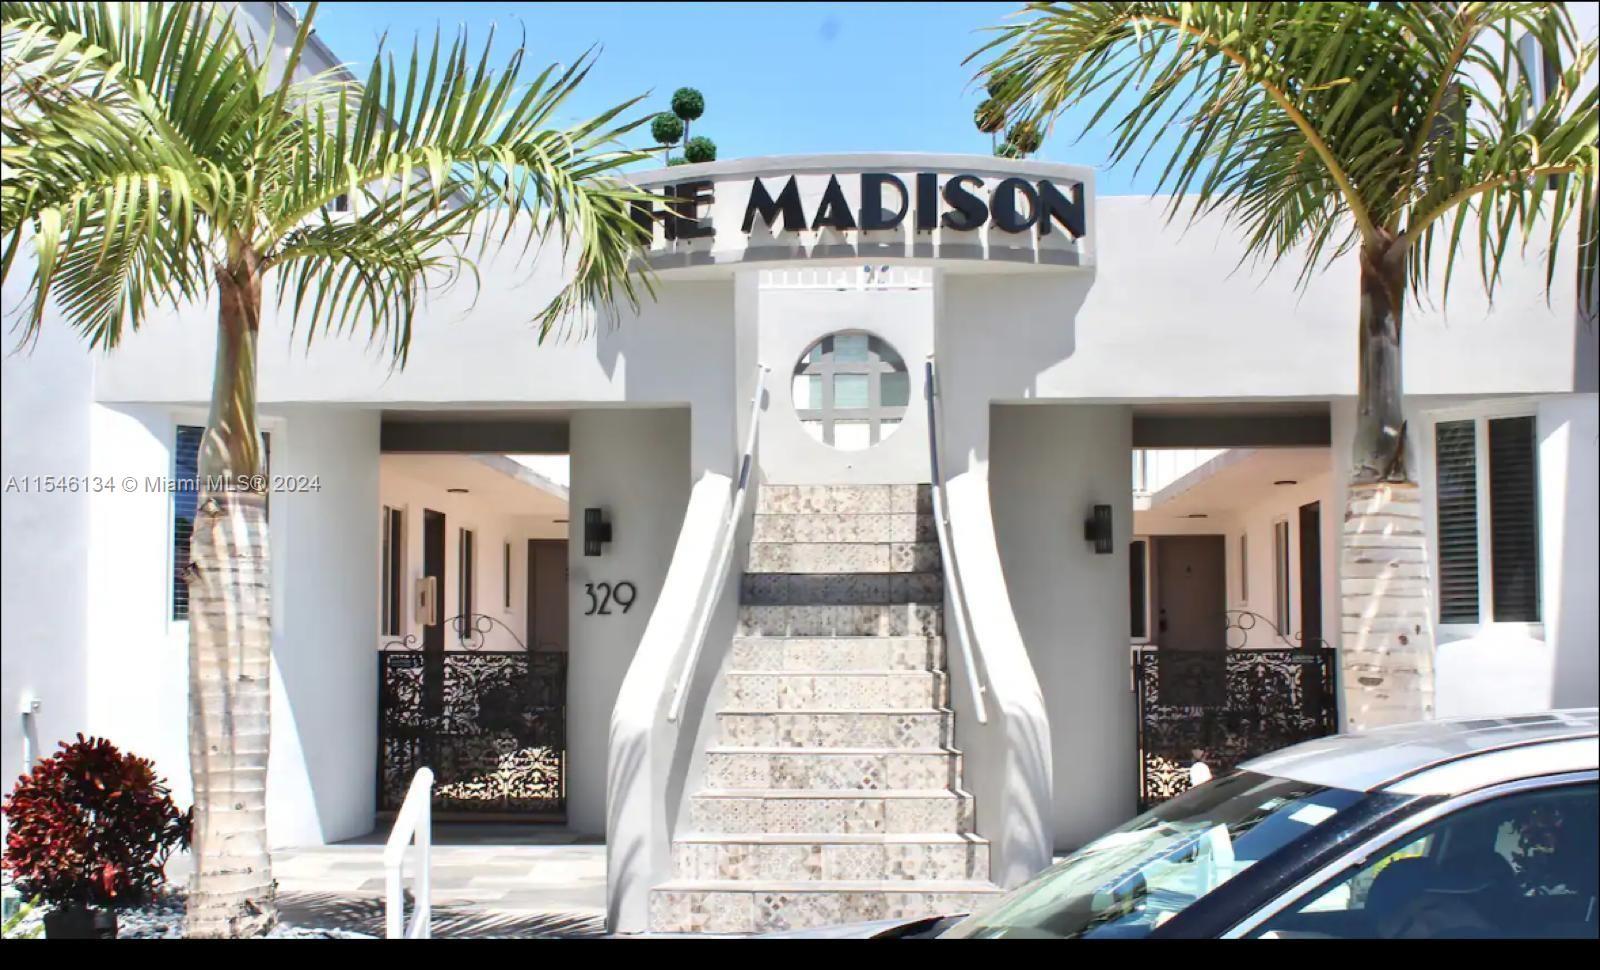 Photo of 329 Madison St #9 in Hollywood, FL